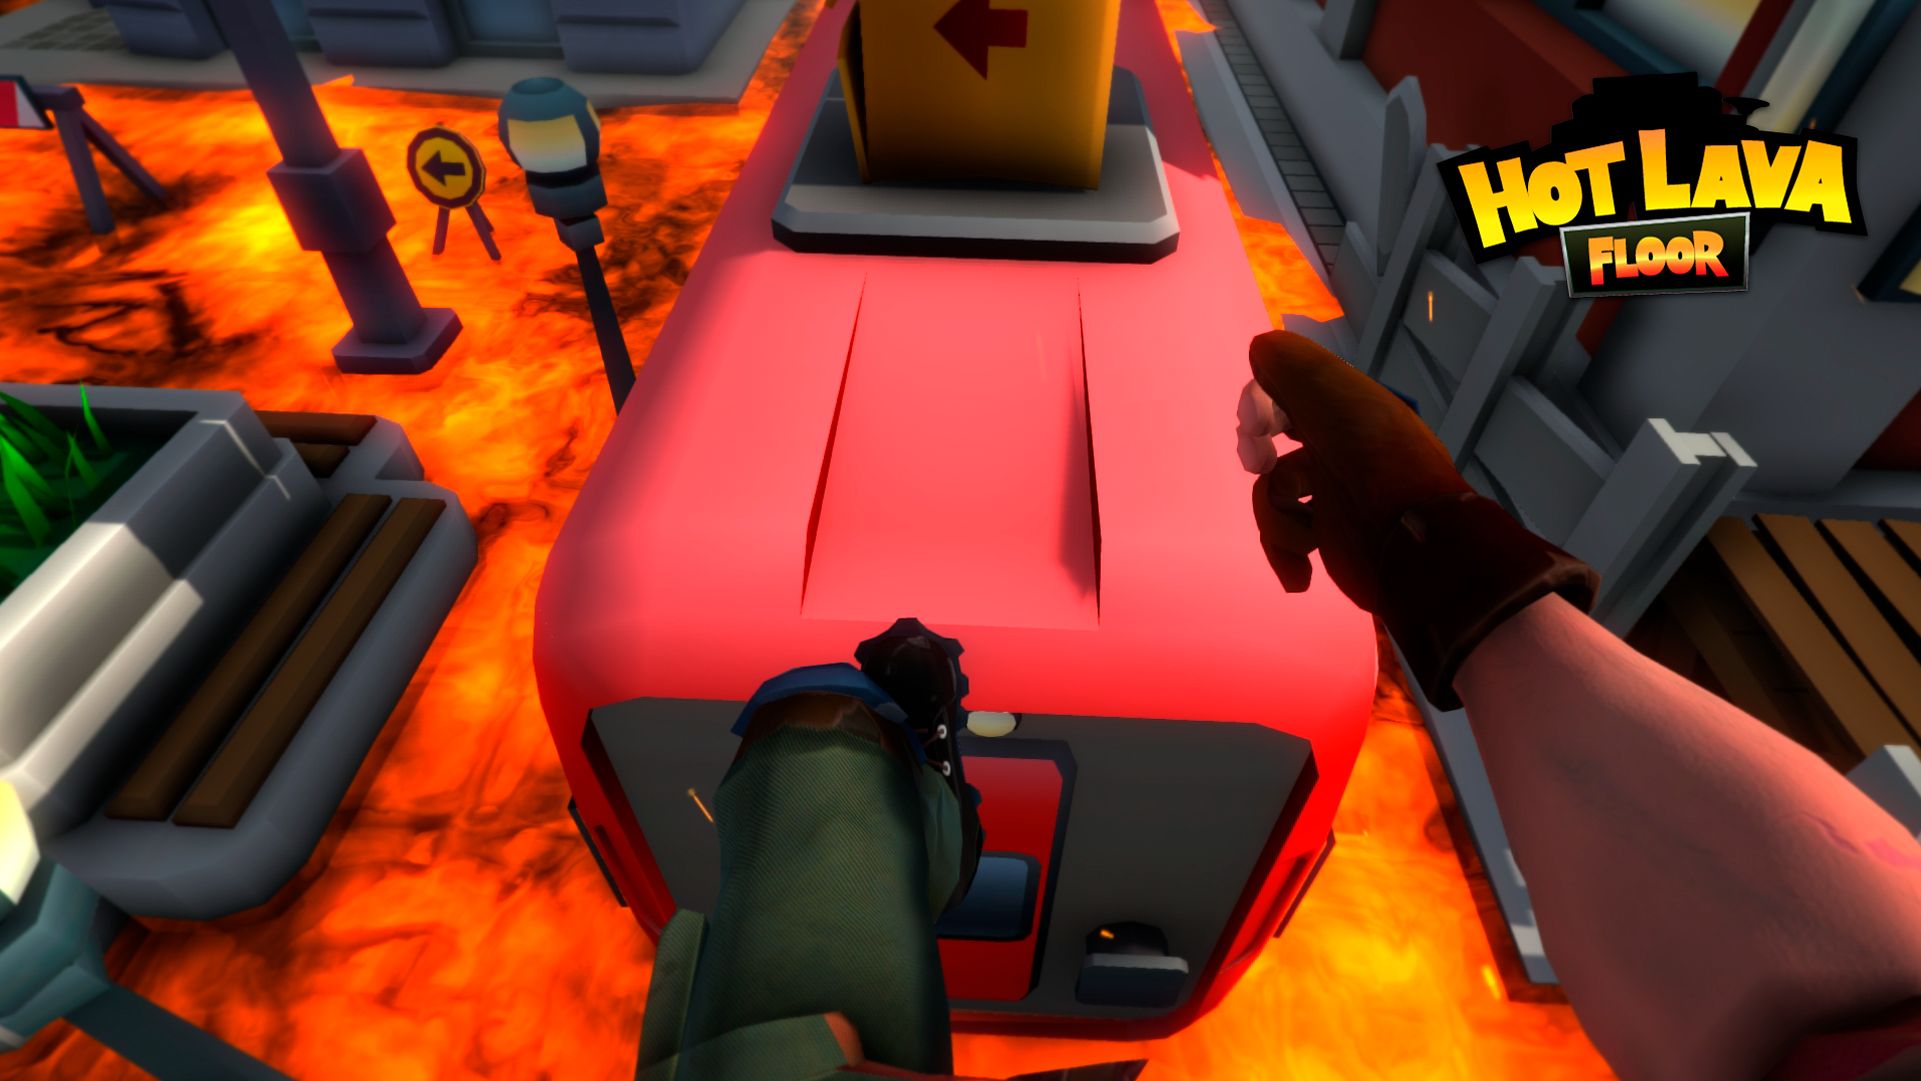 Hot Lava Floor Download Apk For Android Free Mob Org